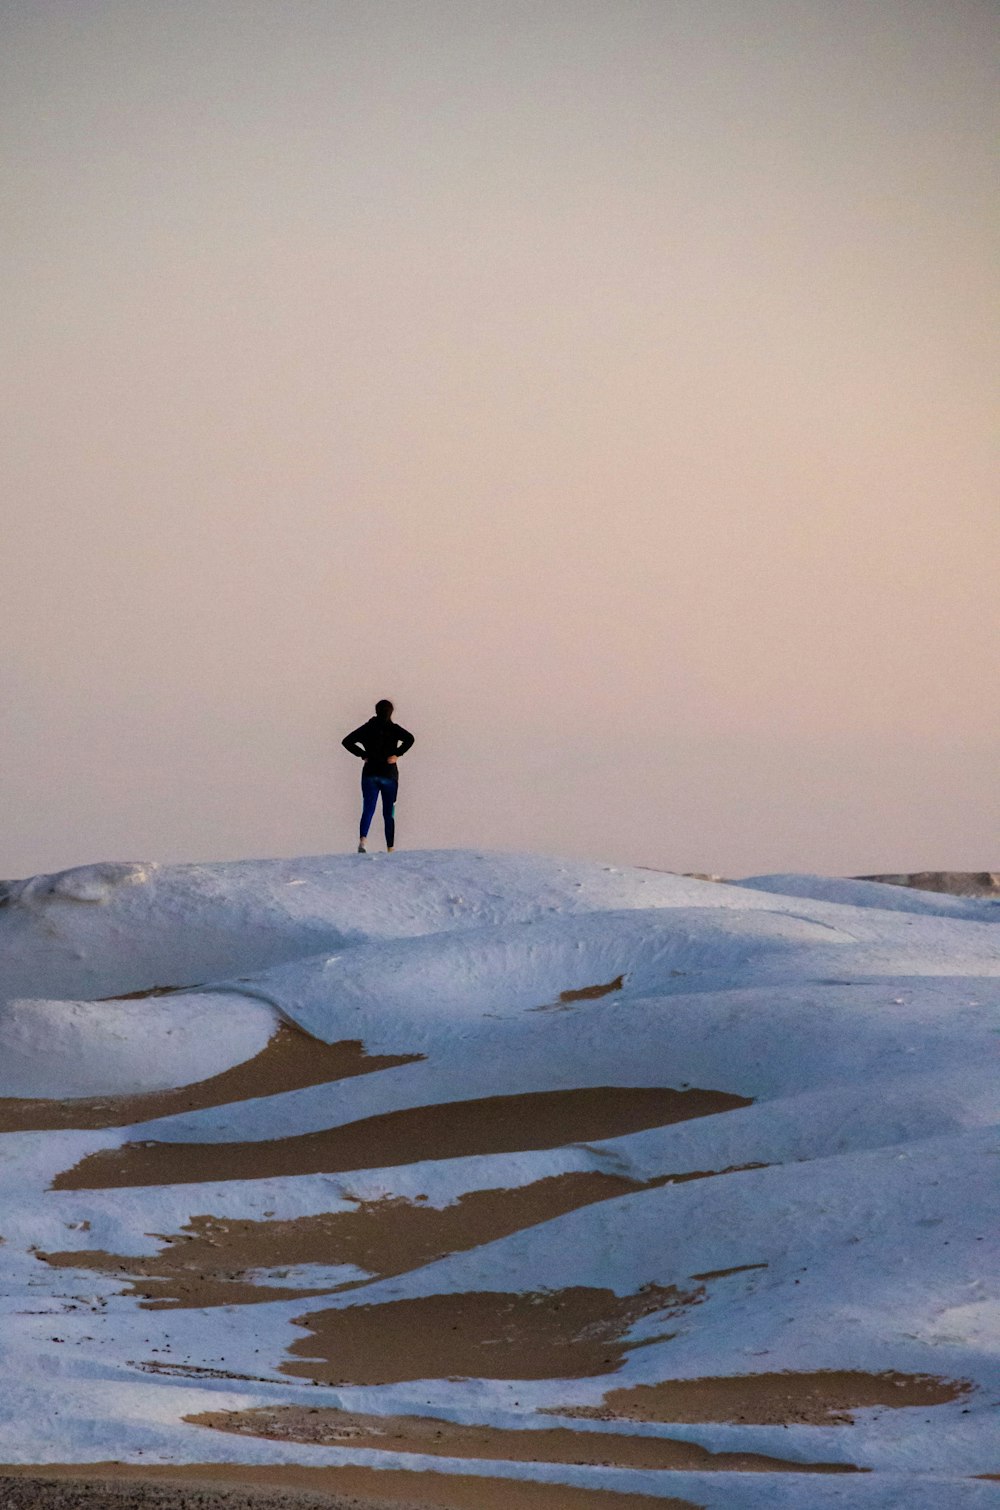 a person standing on a snowy hill